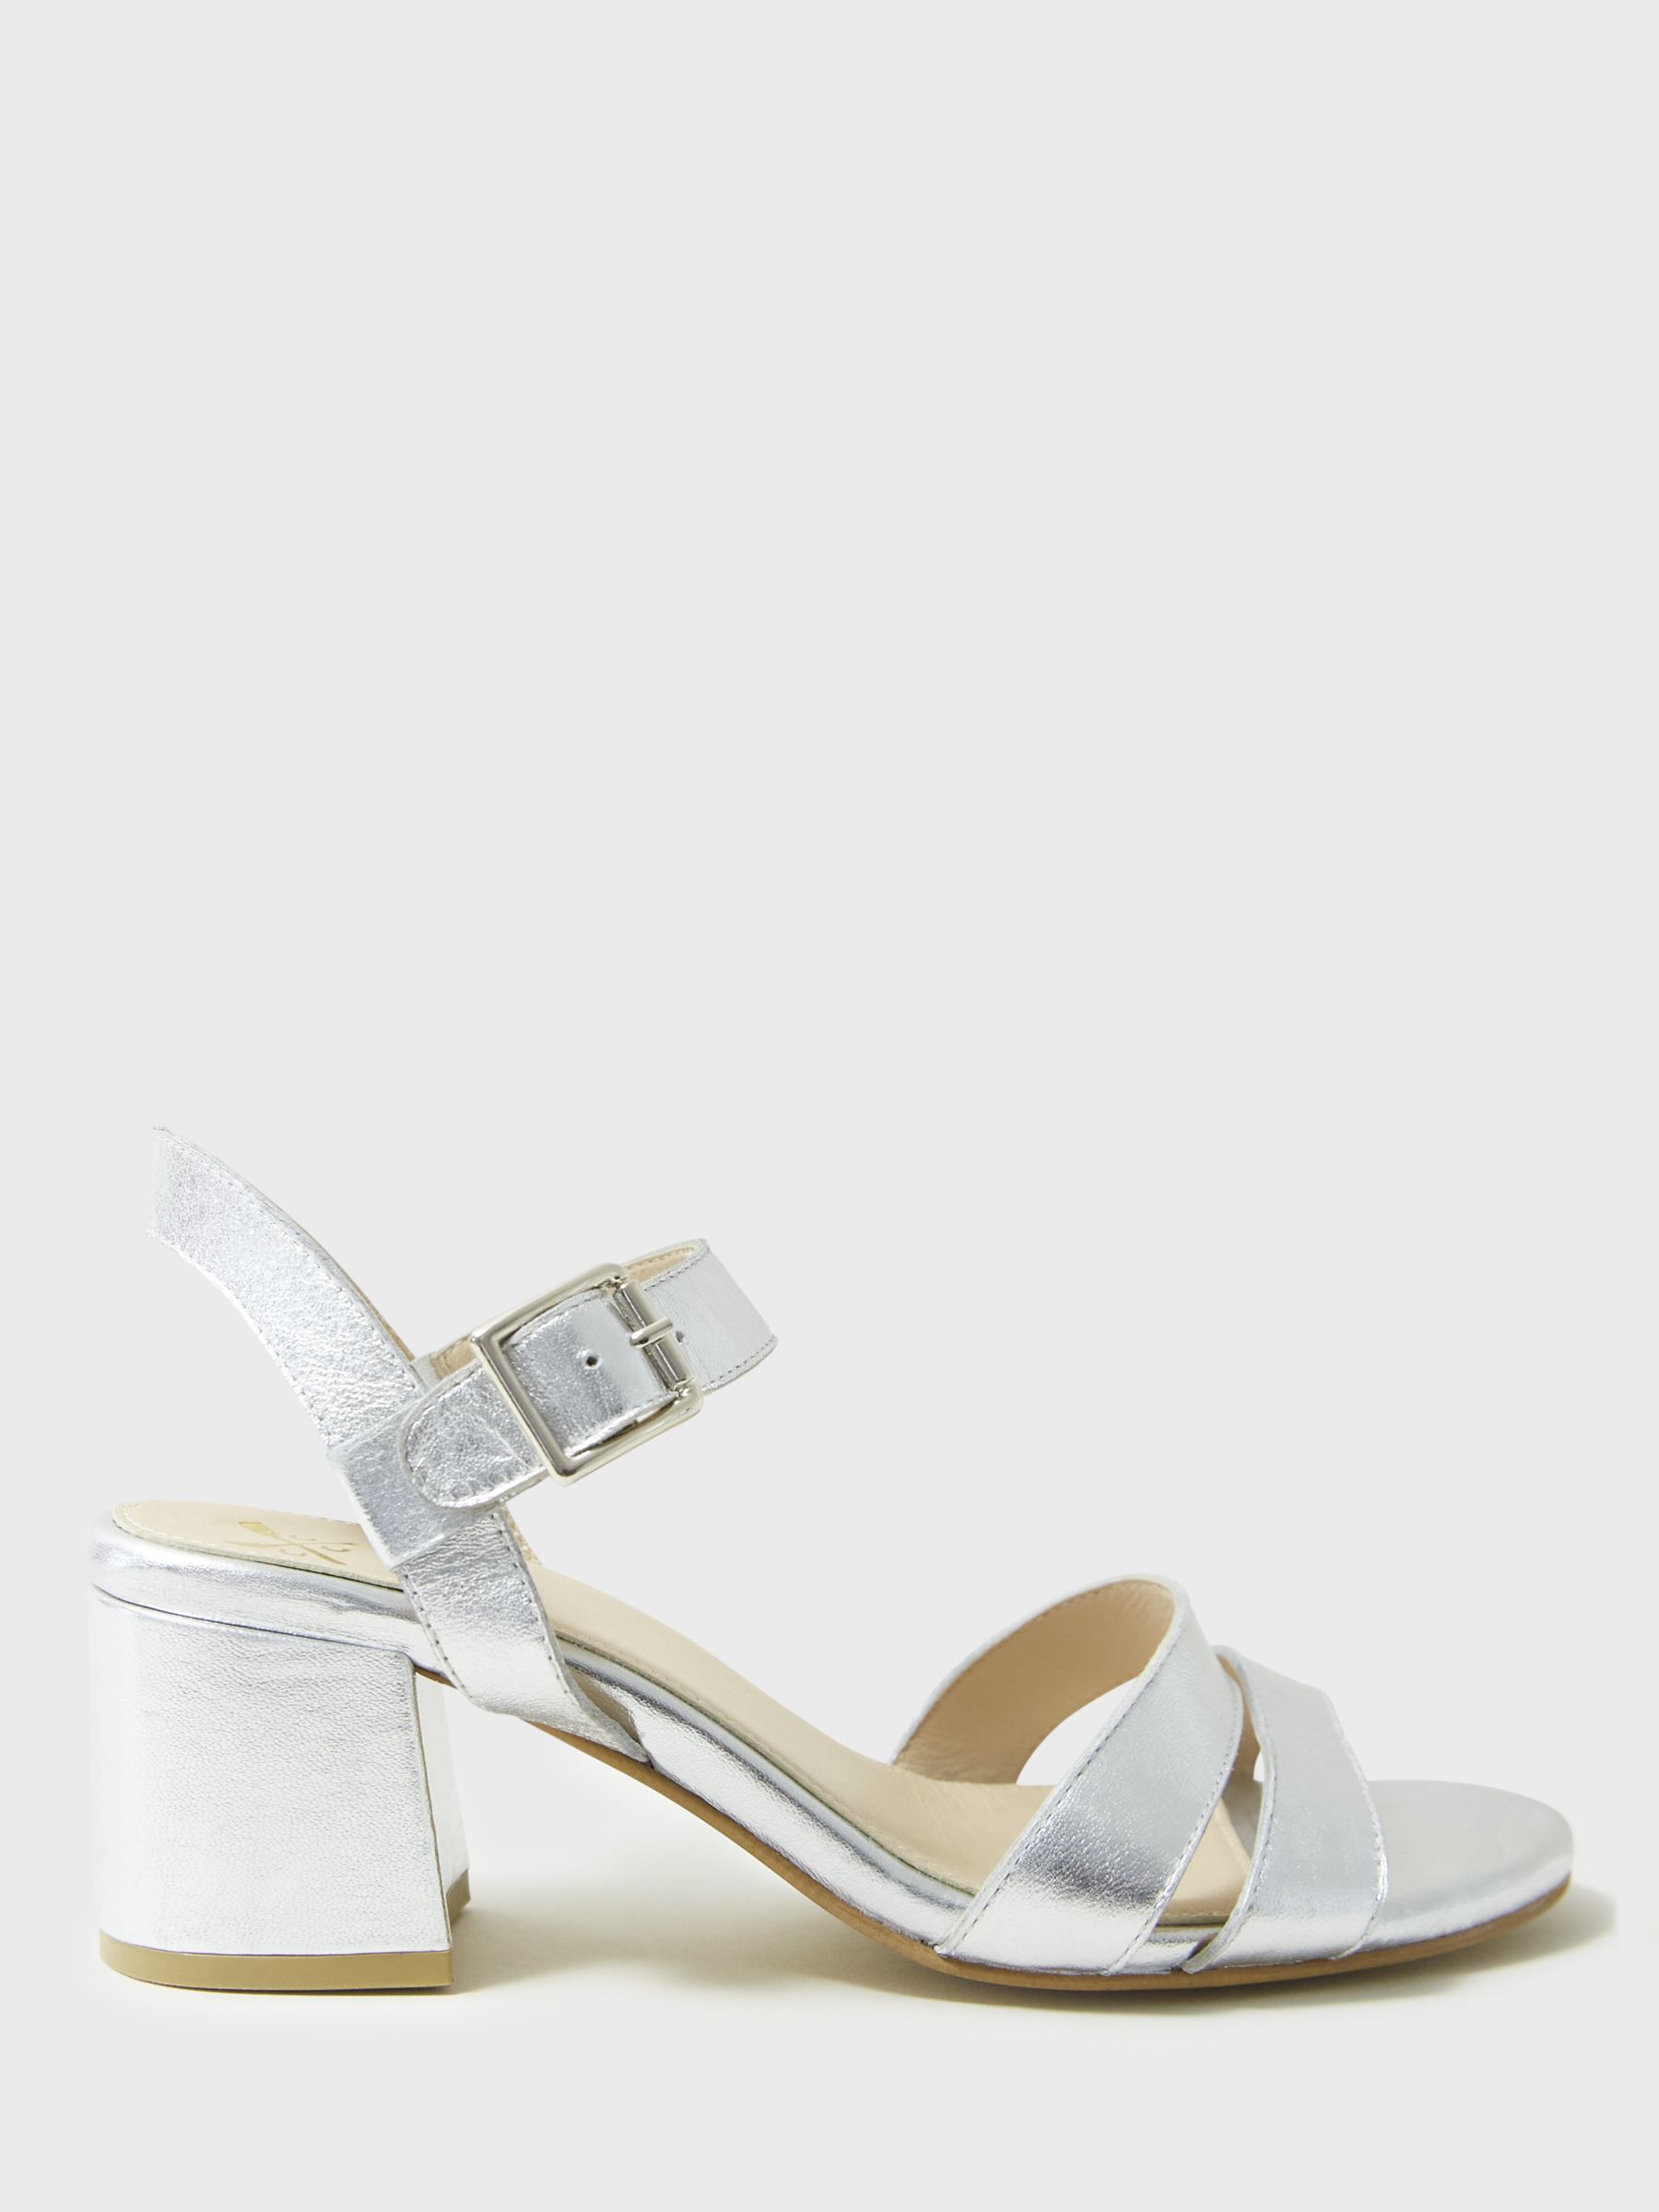 Crew Clothing Leather Double Strap Sandals, Silver, 8